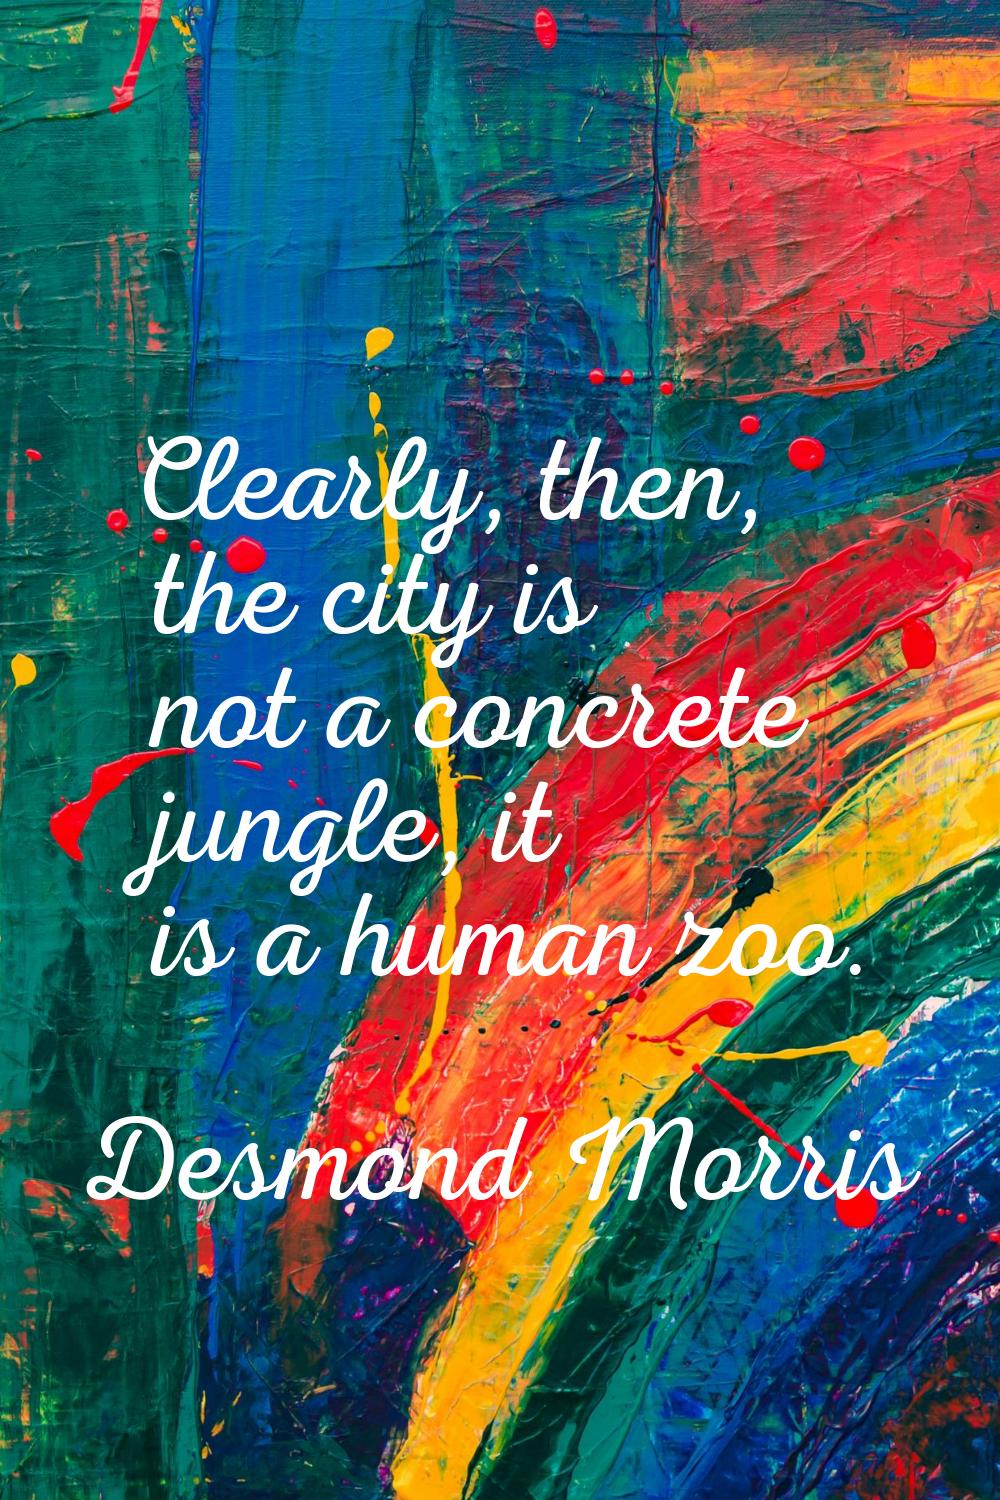 Clearly, then, the city is not a concrete jungle, it is a human zoo.